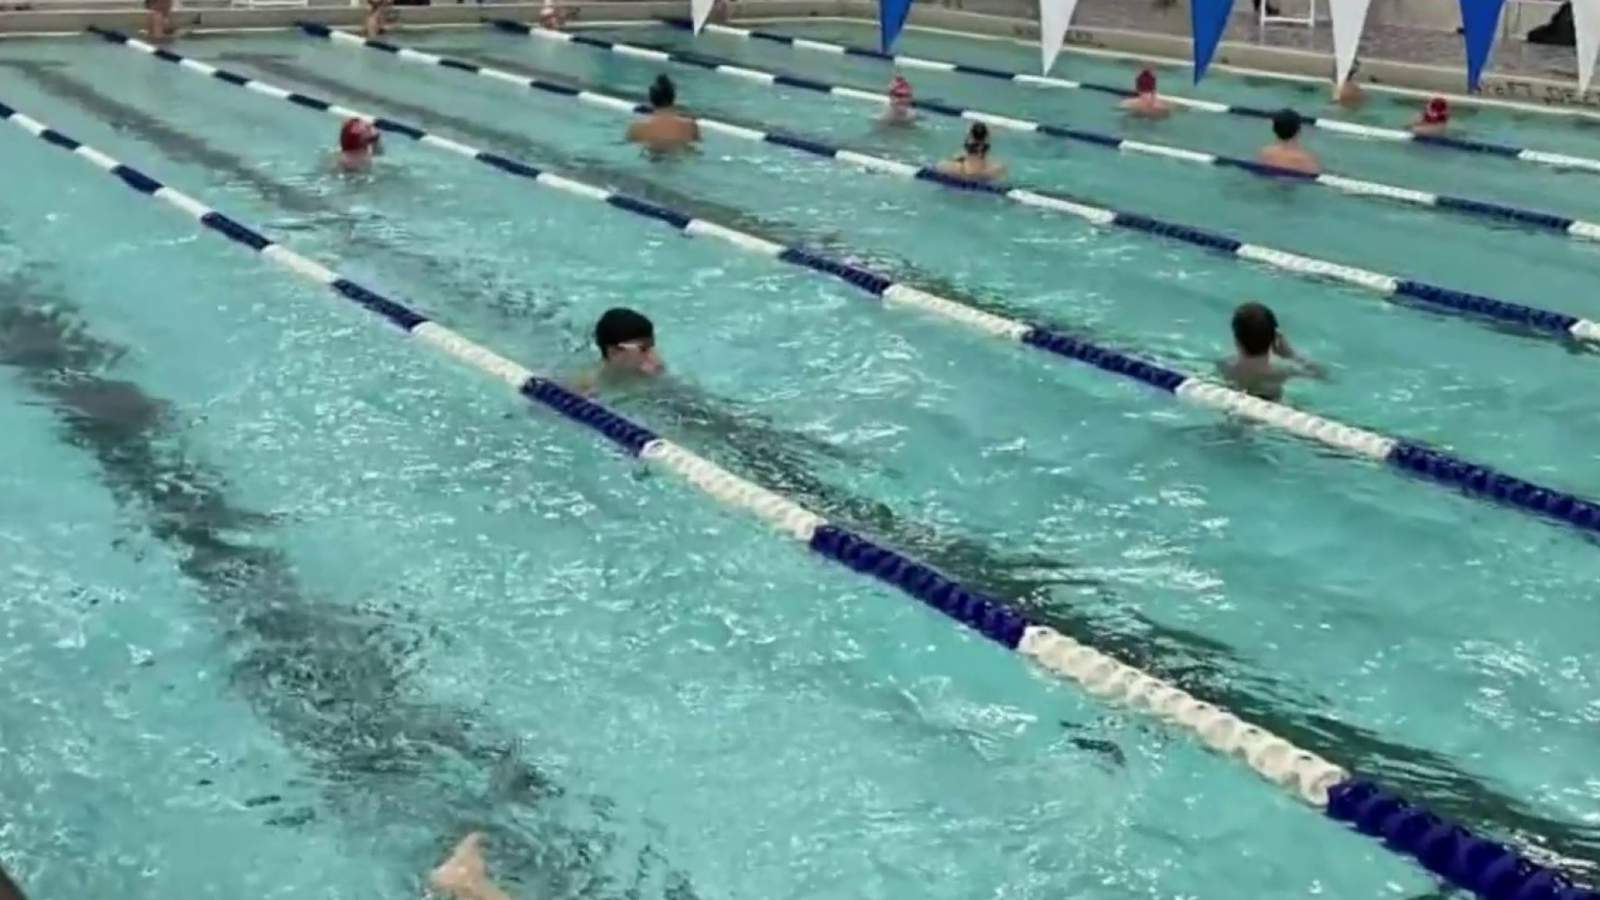 Michigan swim clubs in limbo as pandemic limits access to indoor pools